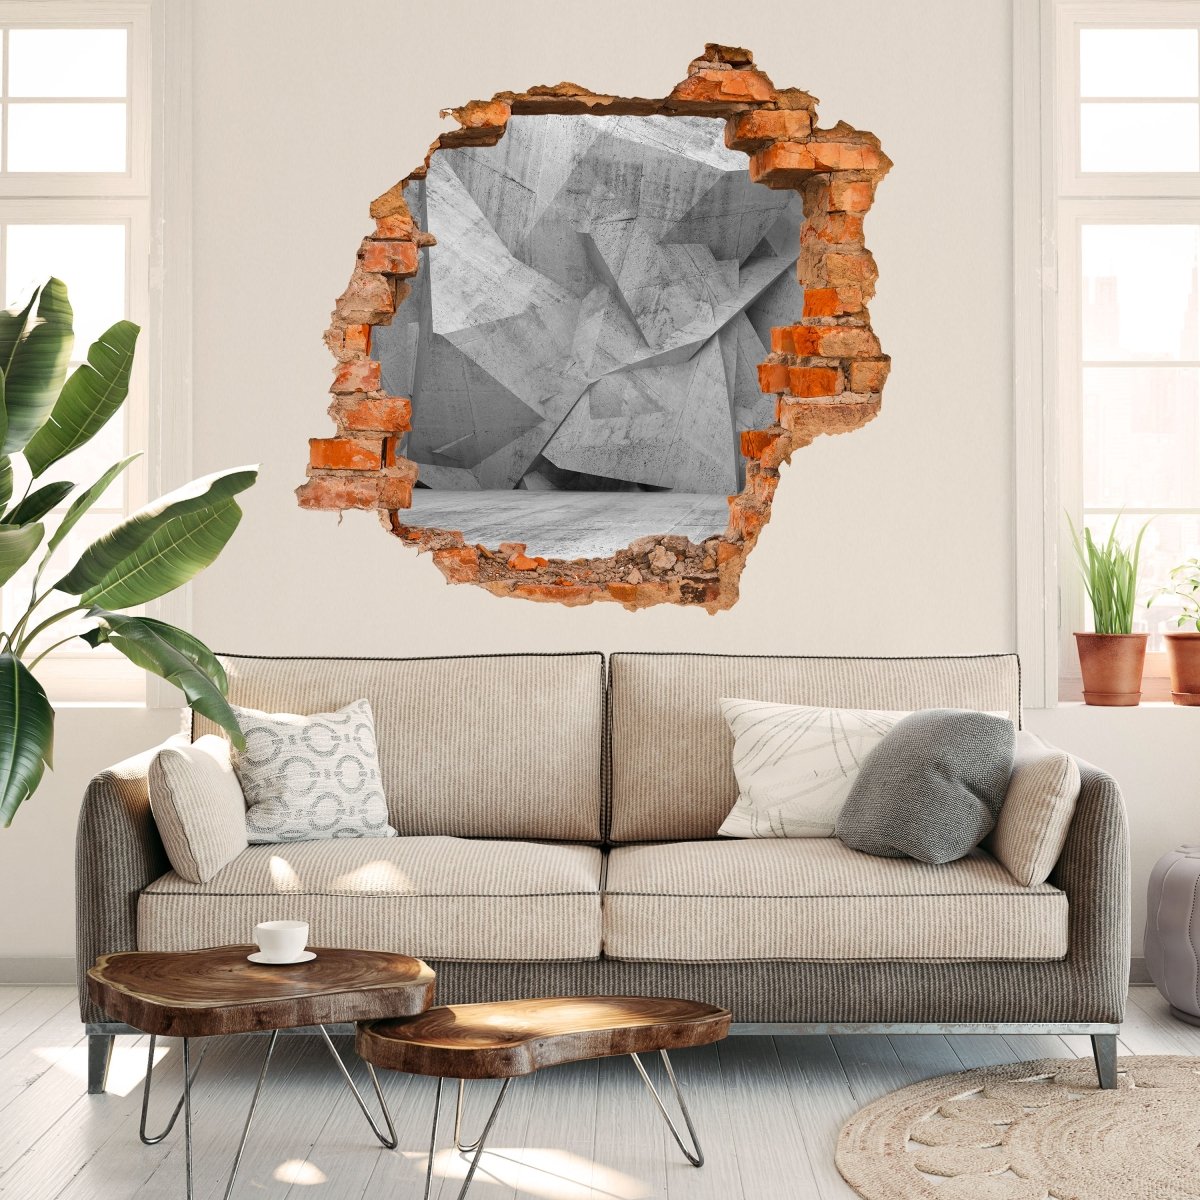 3D Wall Sticker Abstract Concrete Interior - Wall Decal M0792